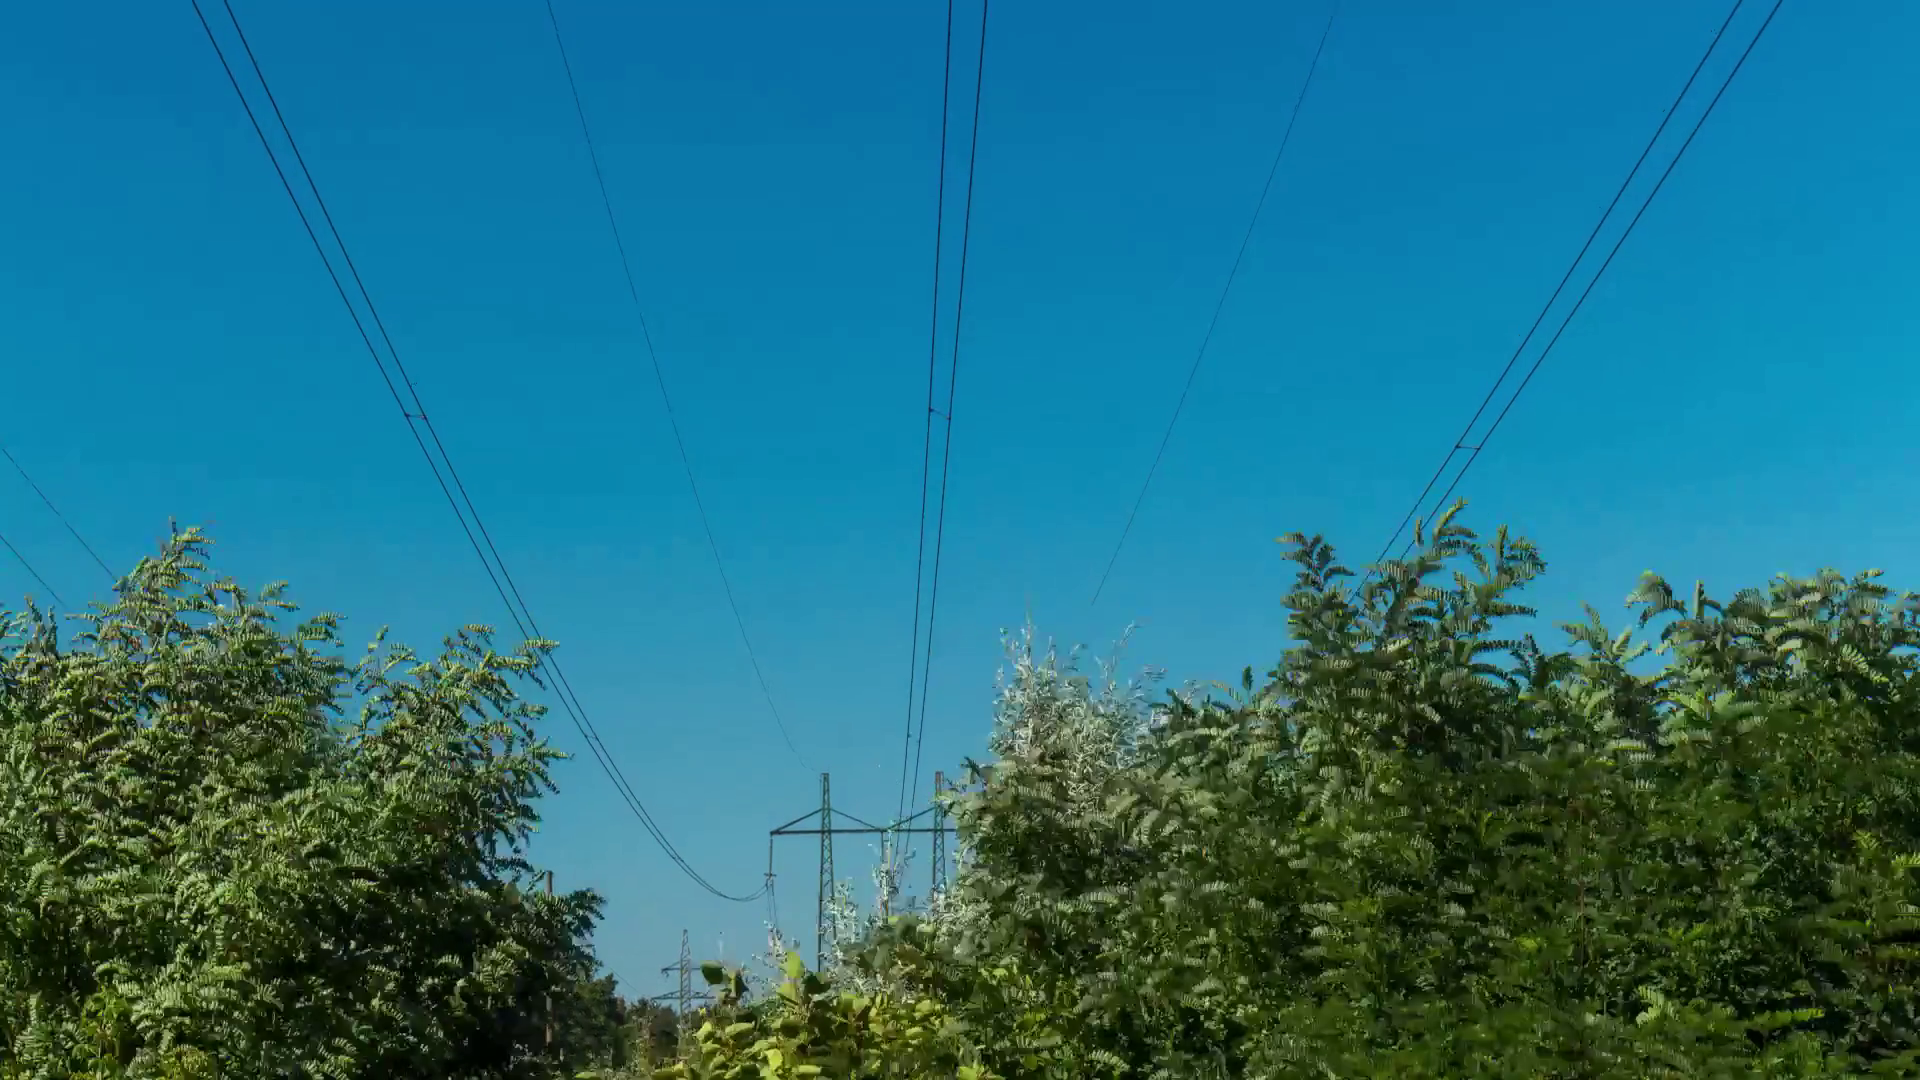 1080i Motion The Branches On Background Of High Voltage Line